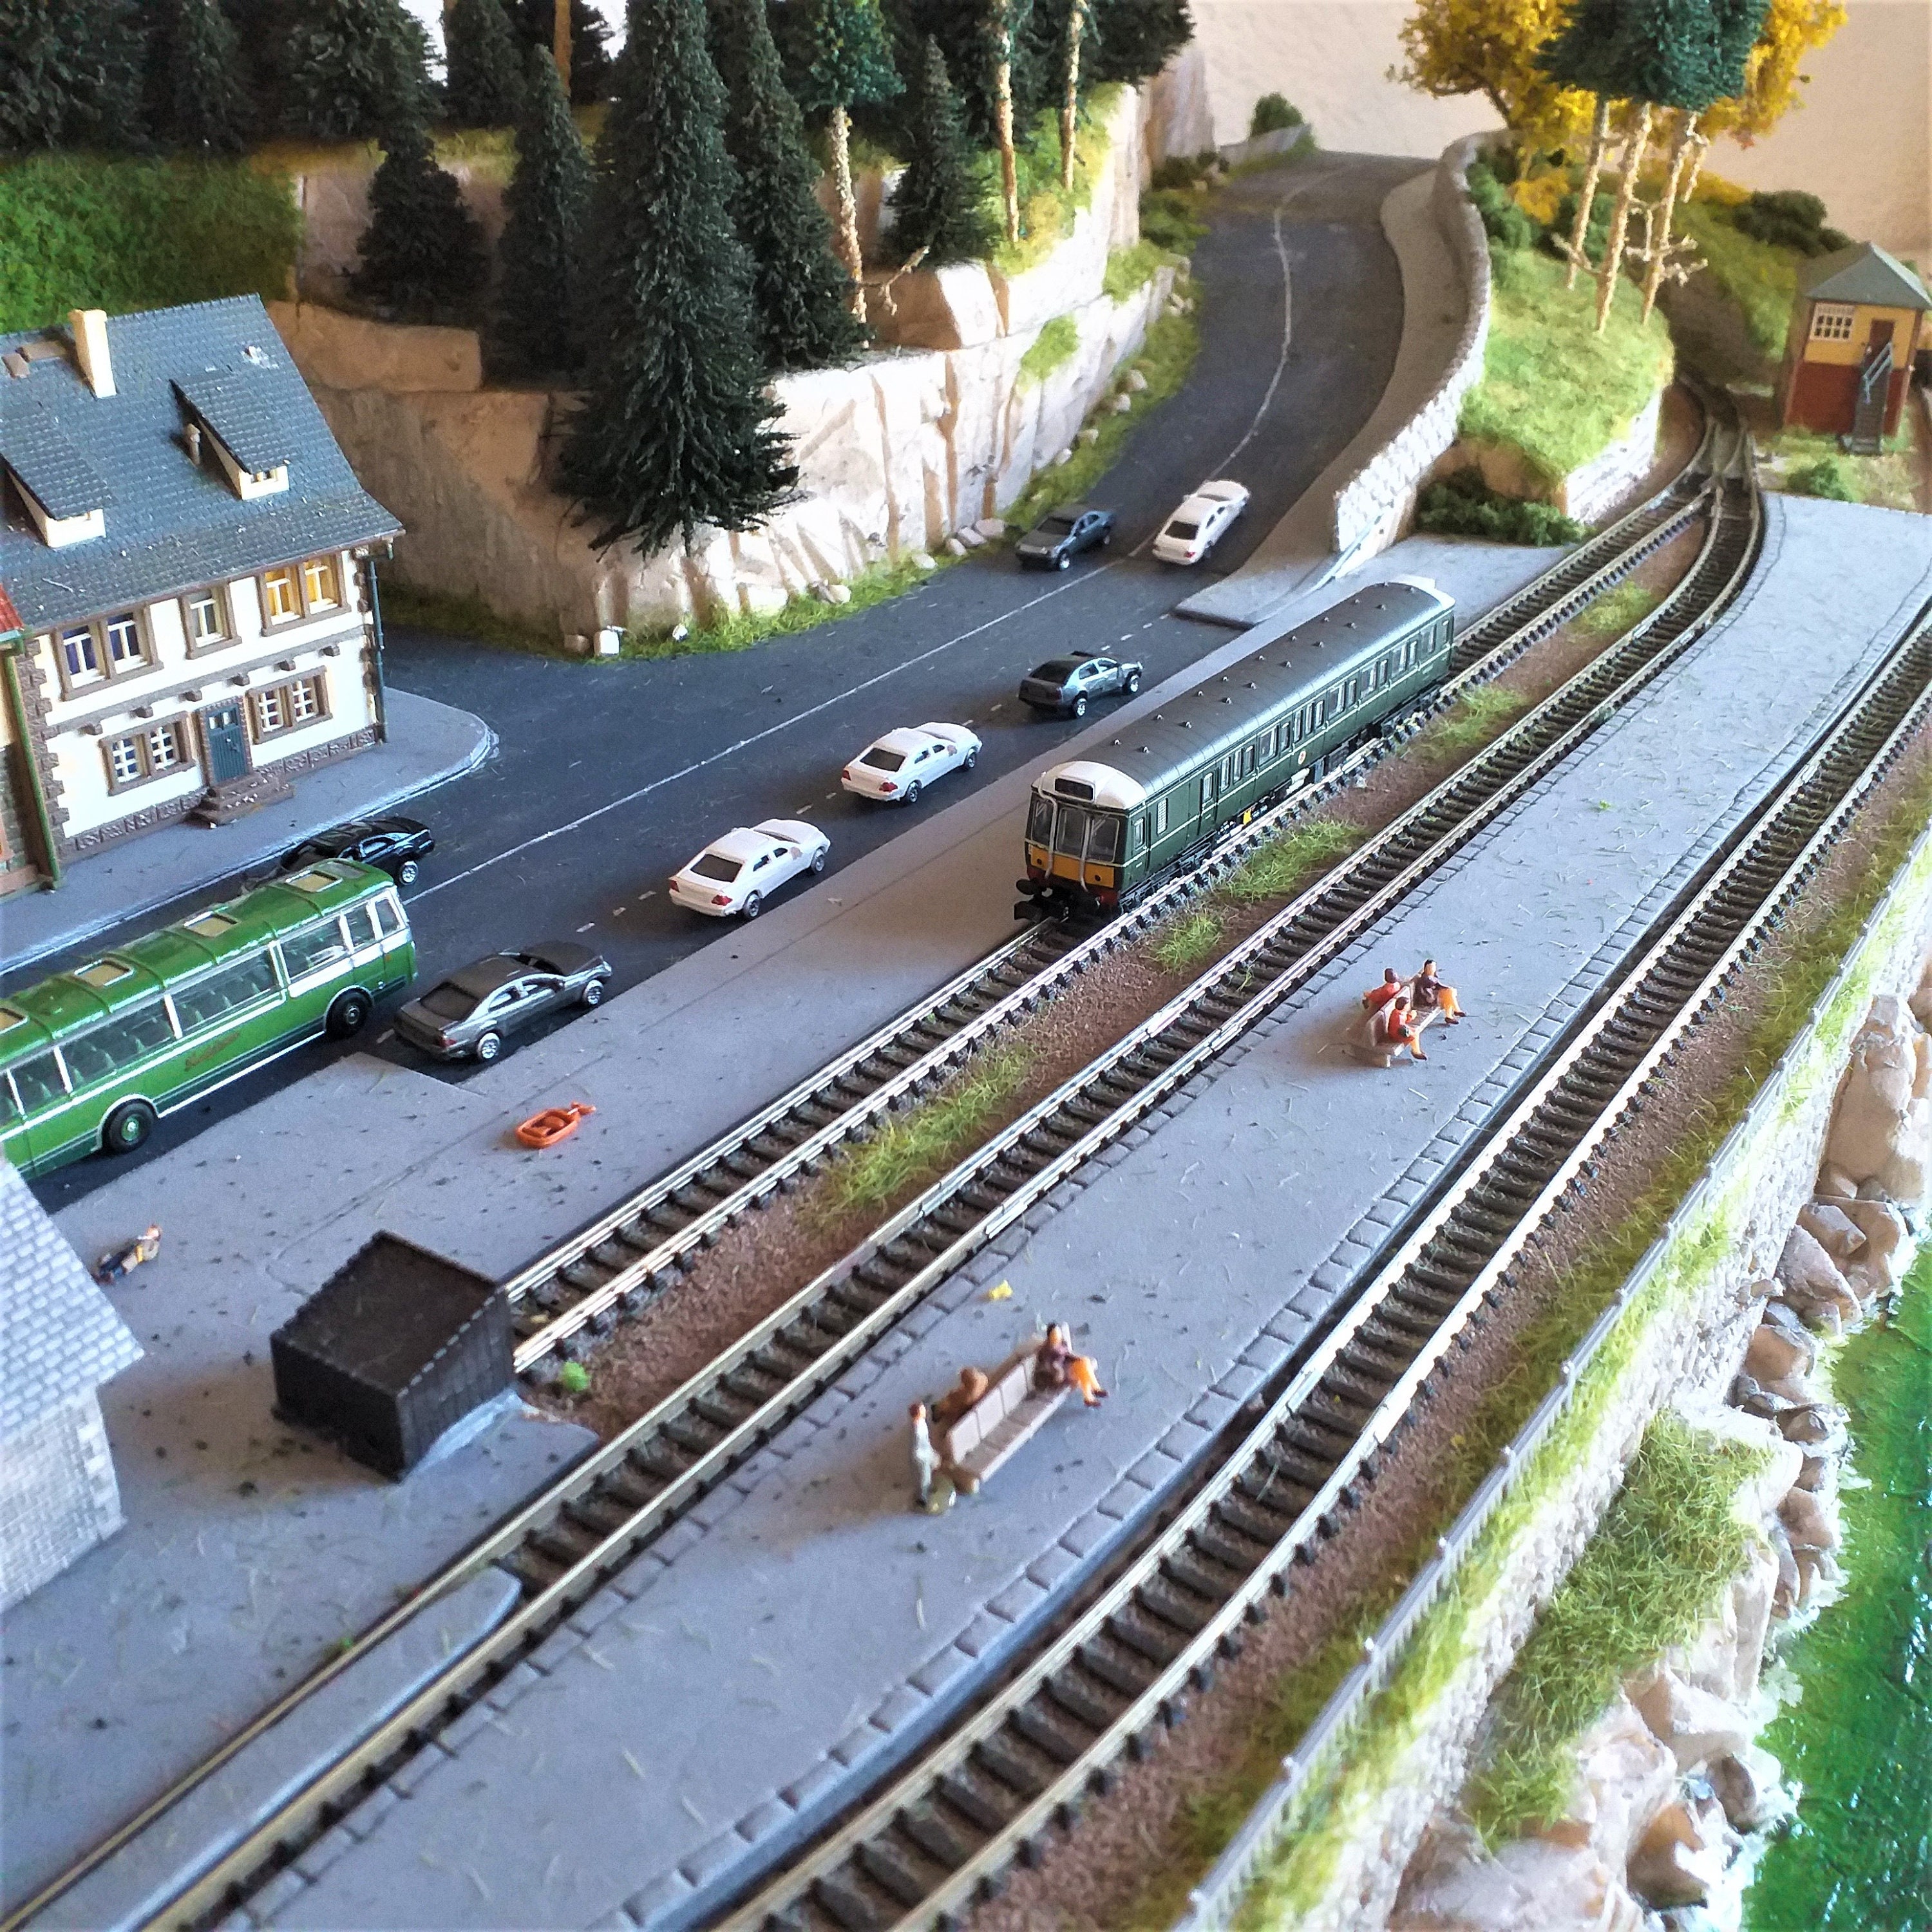 N Scale Model Trains - Locomotives, Rolling Stock, Scenery, Layouts - Jr  Junction Train & Hobby